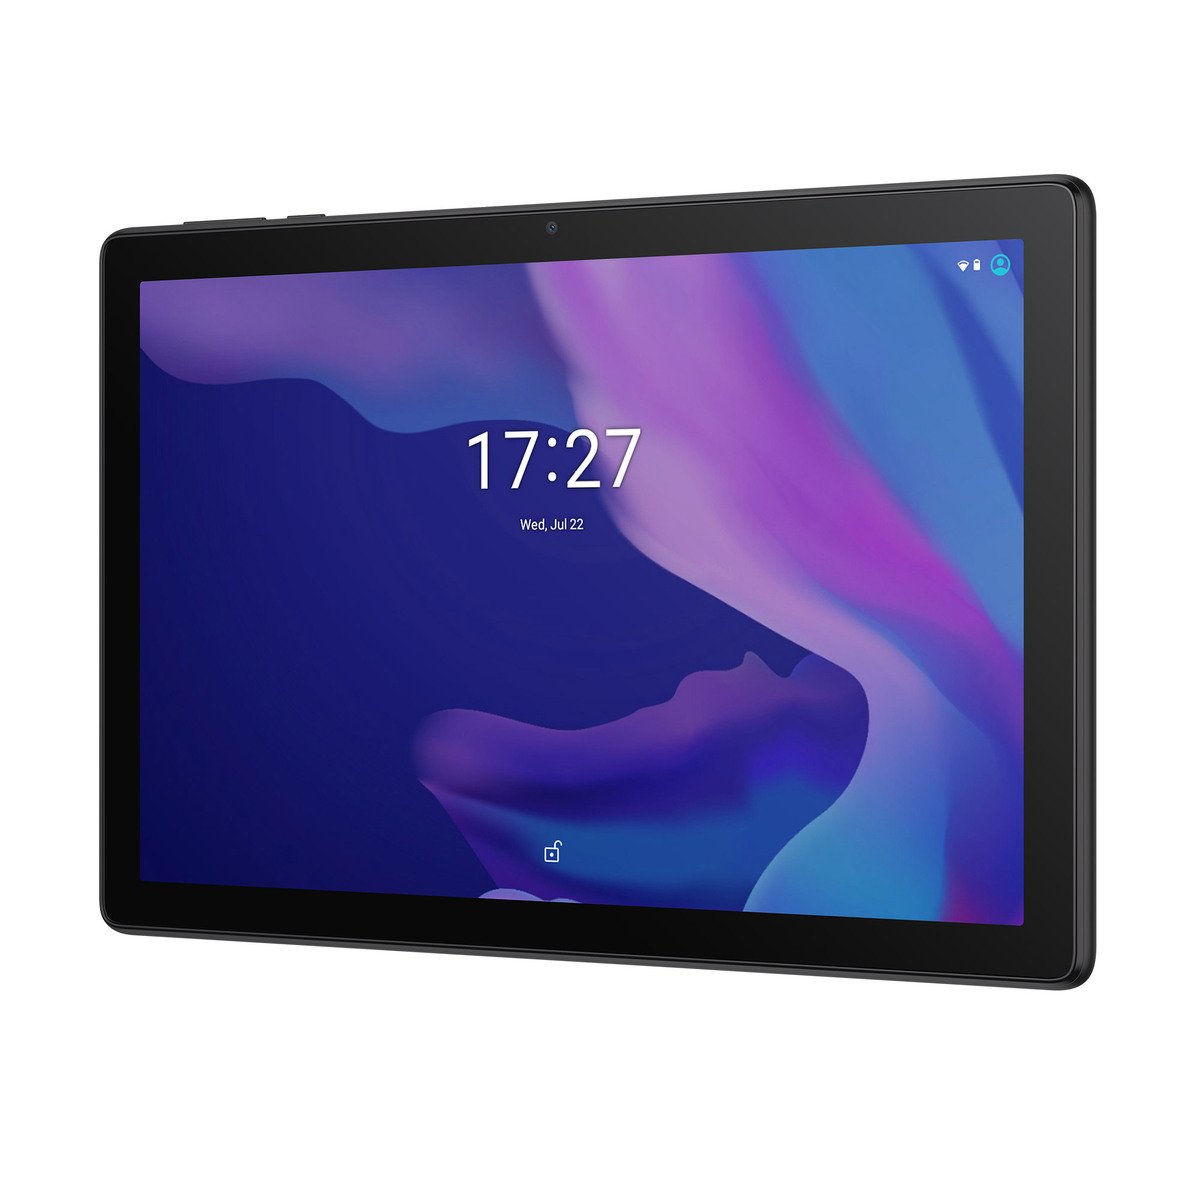 Alcatel Tablet 1T 10 8091, WiFi, Quad-core, 1GB RAM, 16GB Memory, 10 inches Display, Android, Black